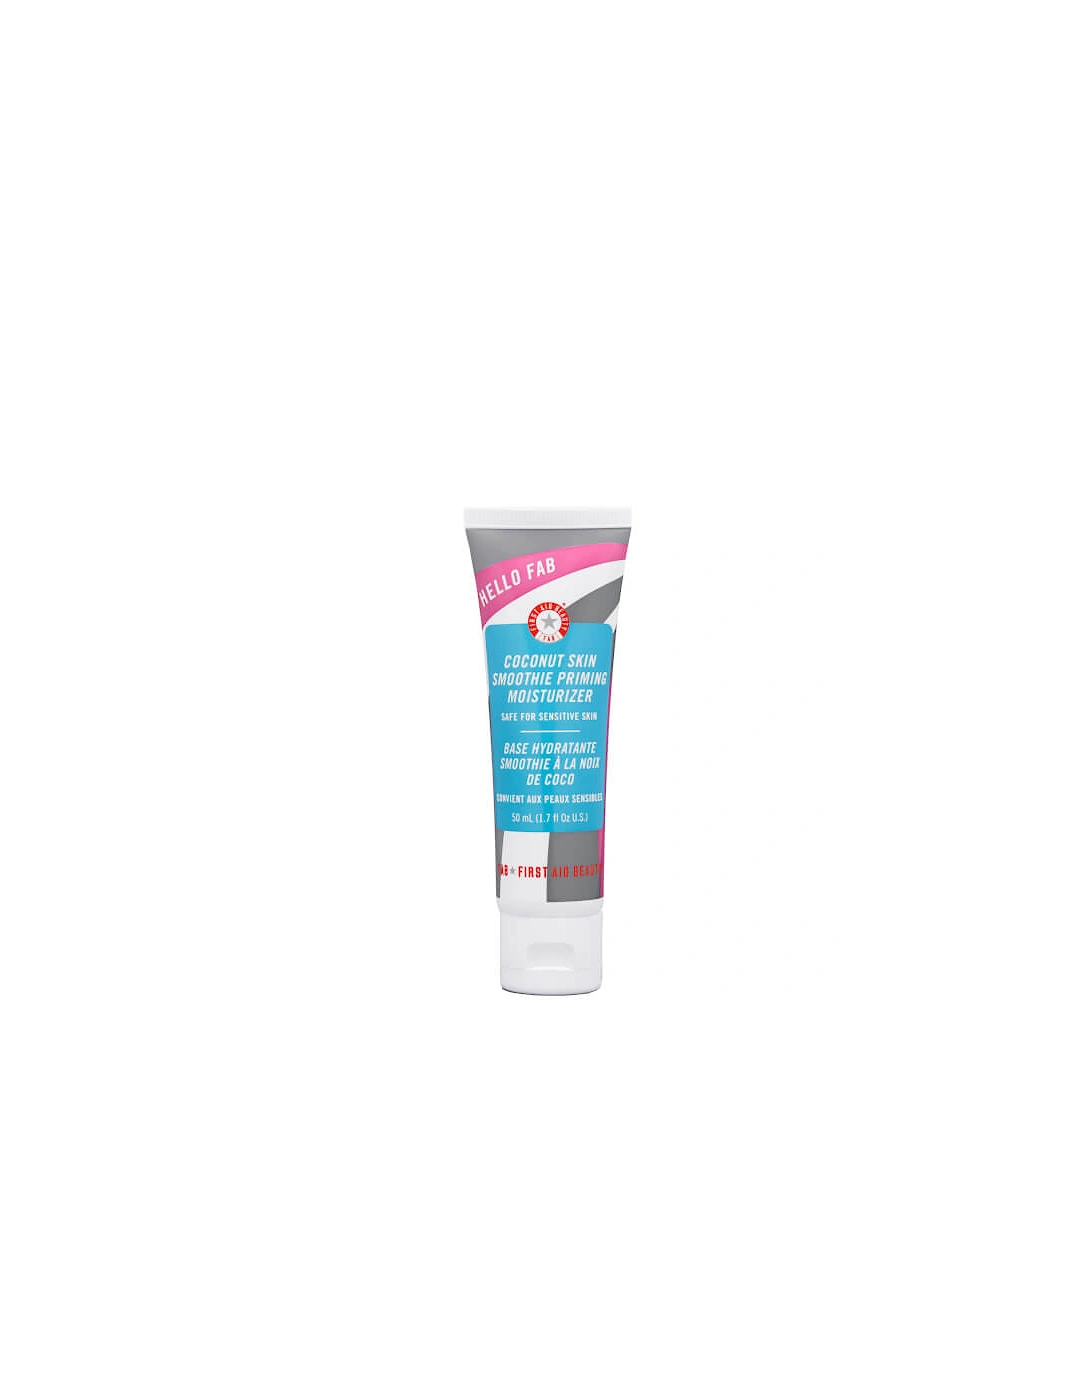 Coconut Skin Smoothie Priming Moisturiser 50ml - First Aid Beauty, 2 of 1